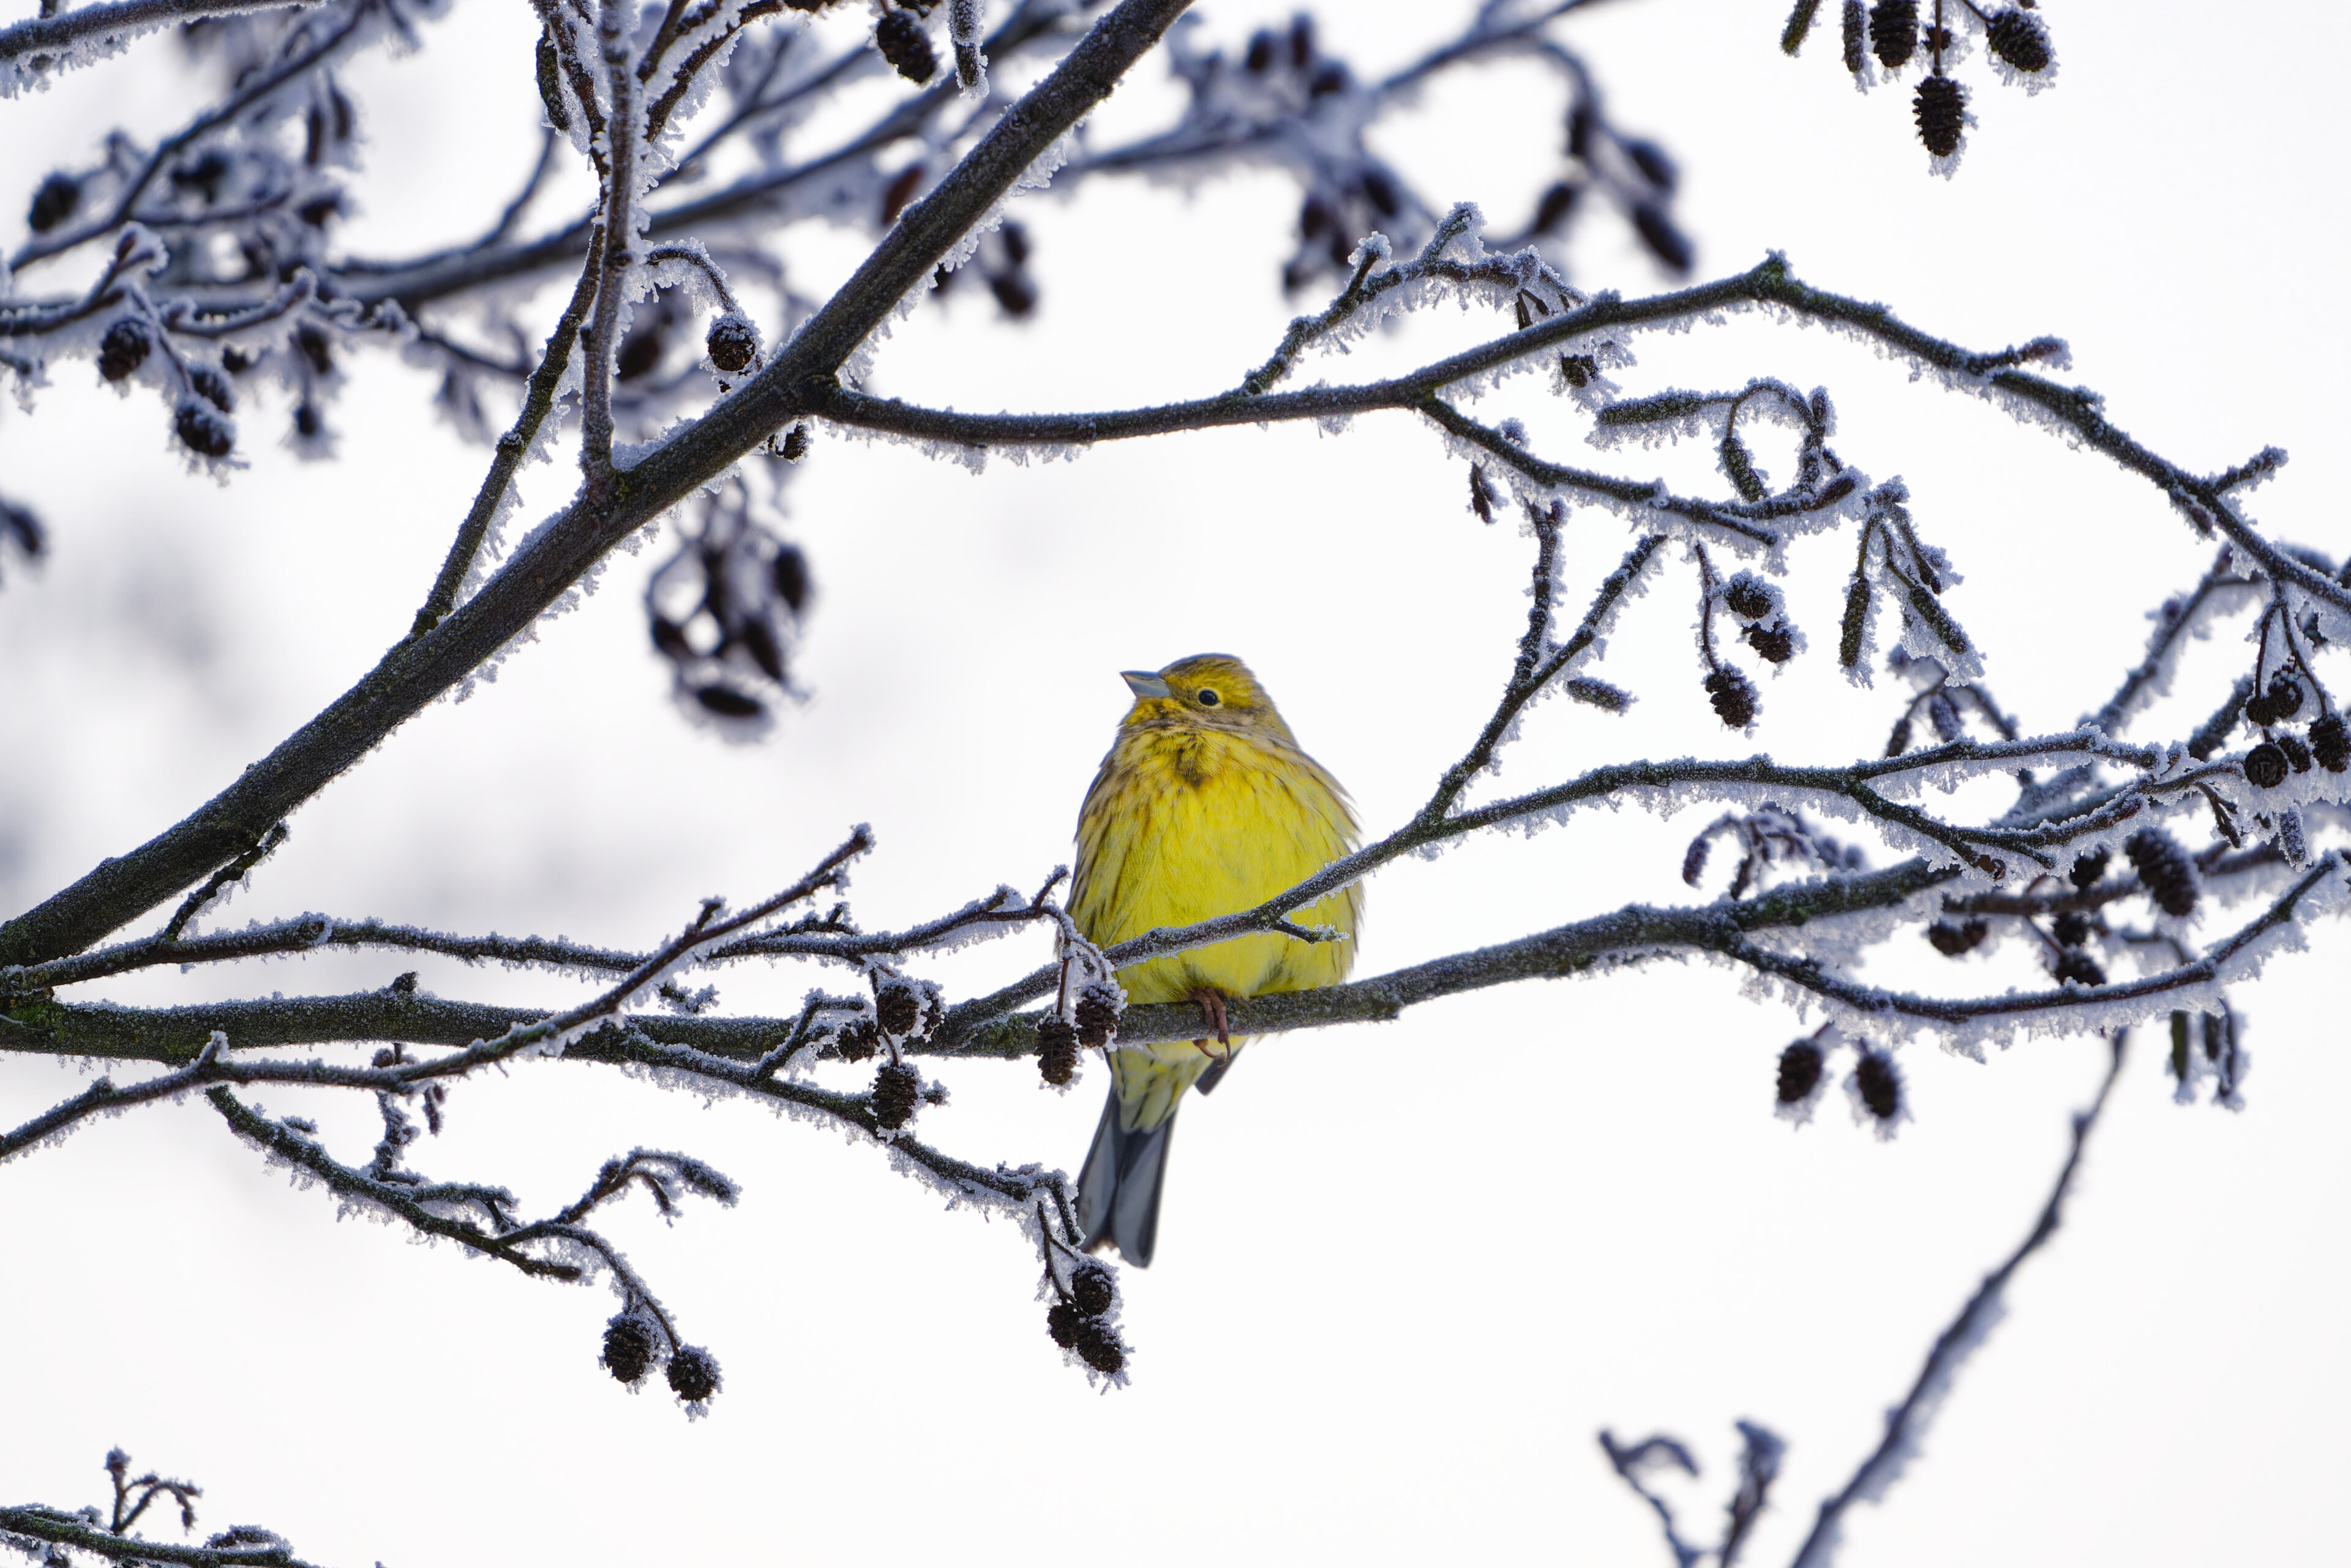 Yellowhammer on frozen branch in winter